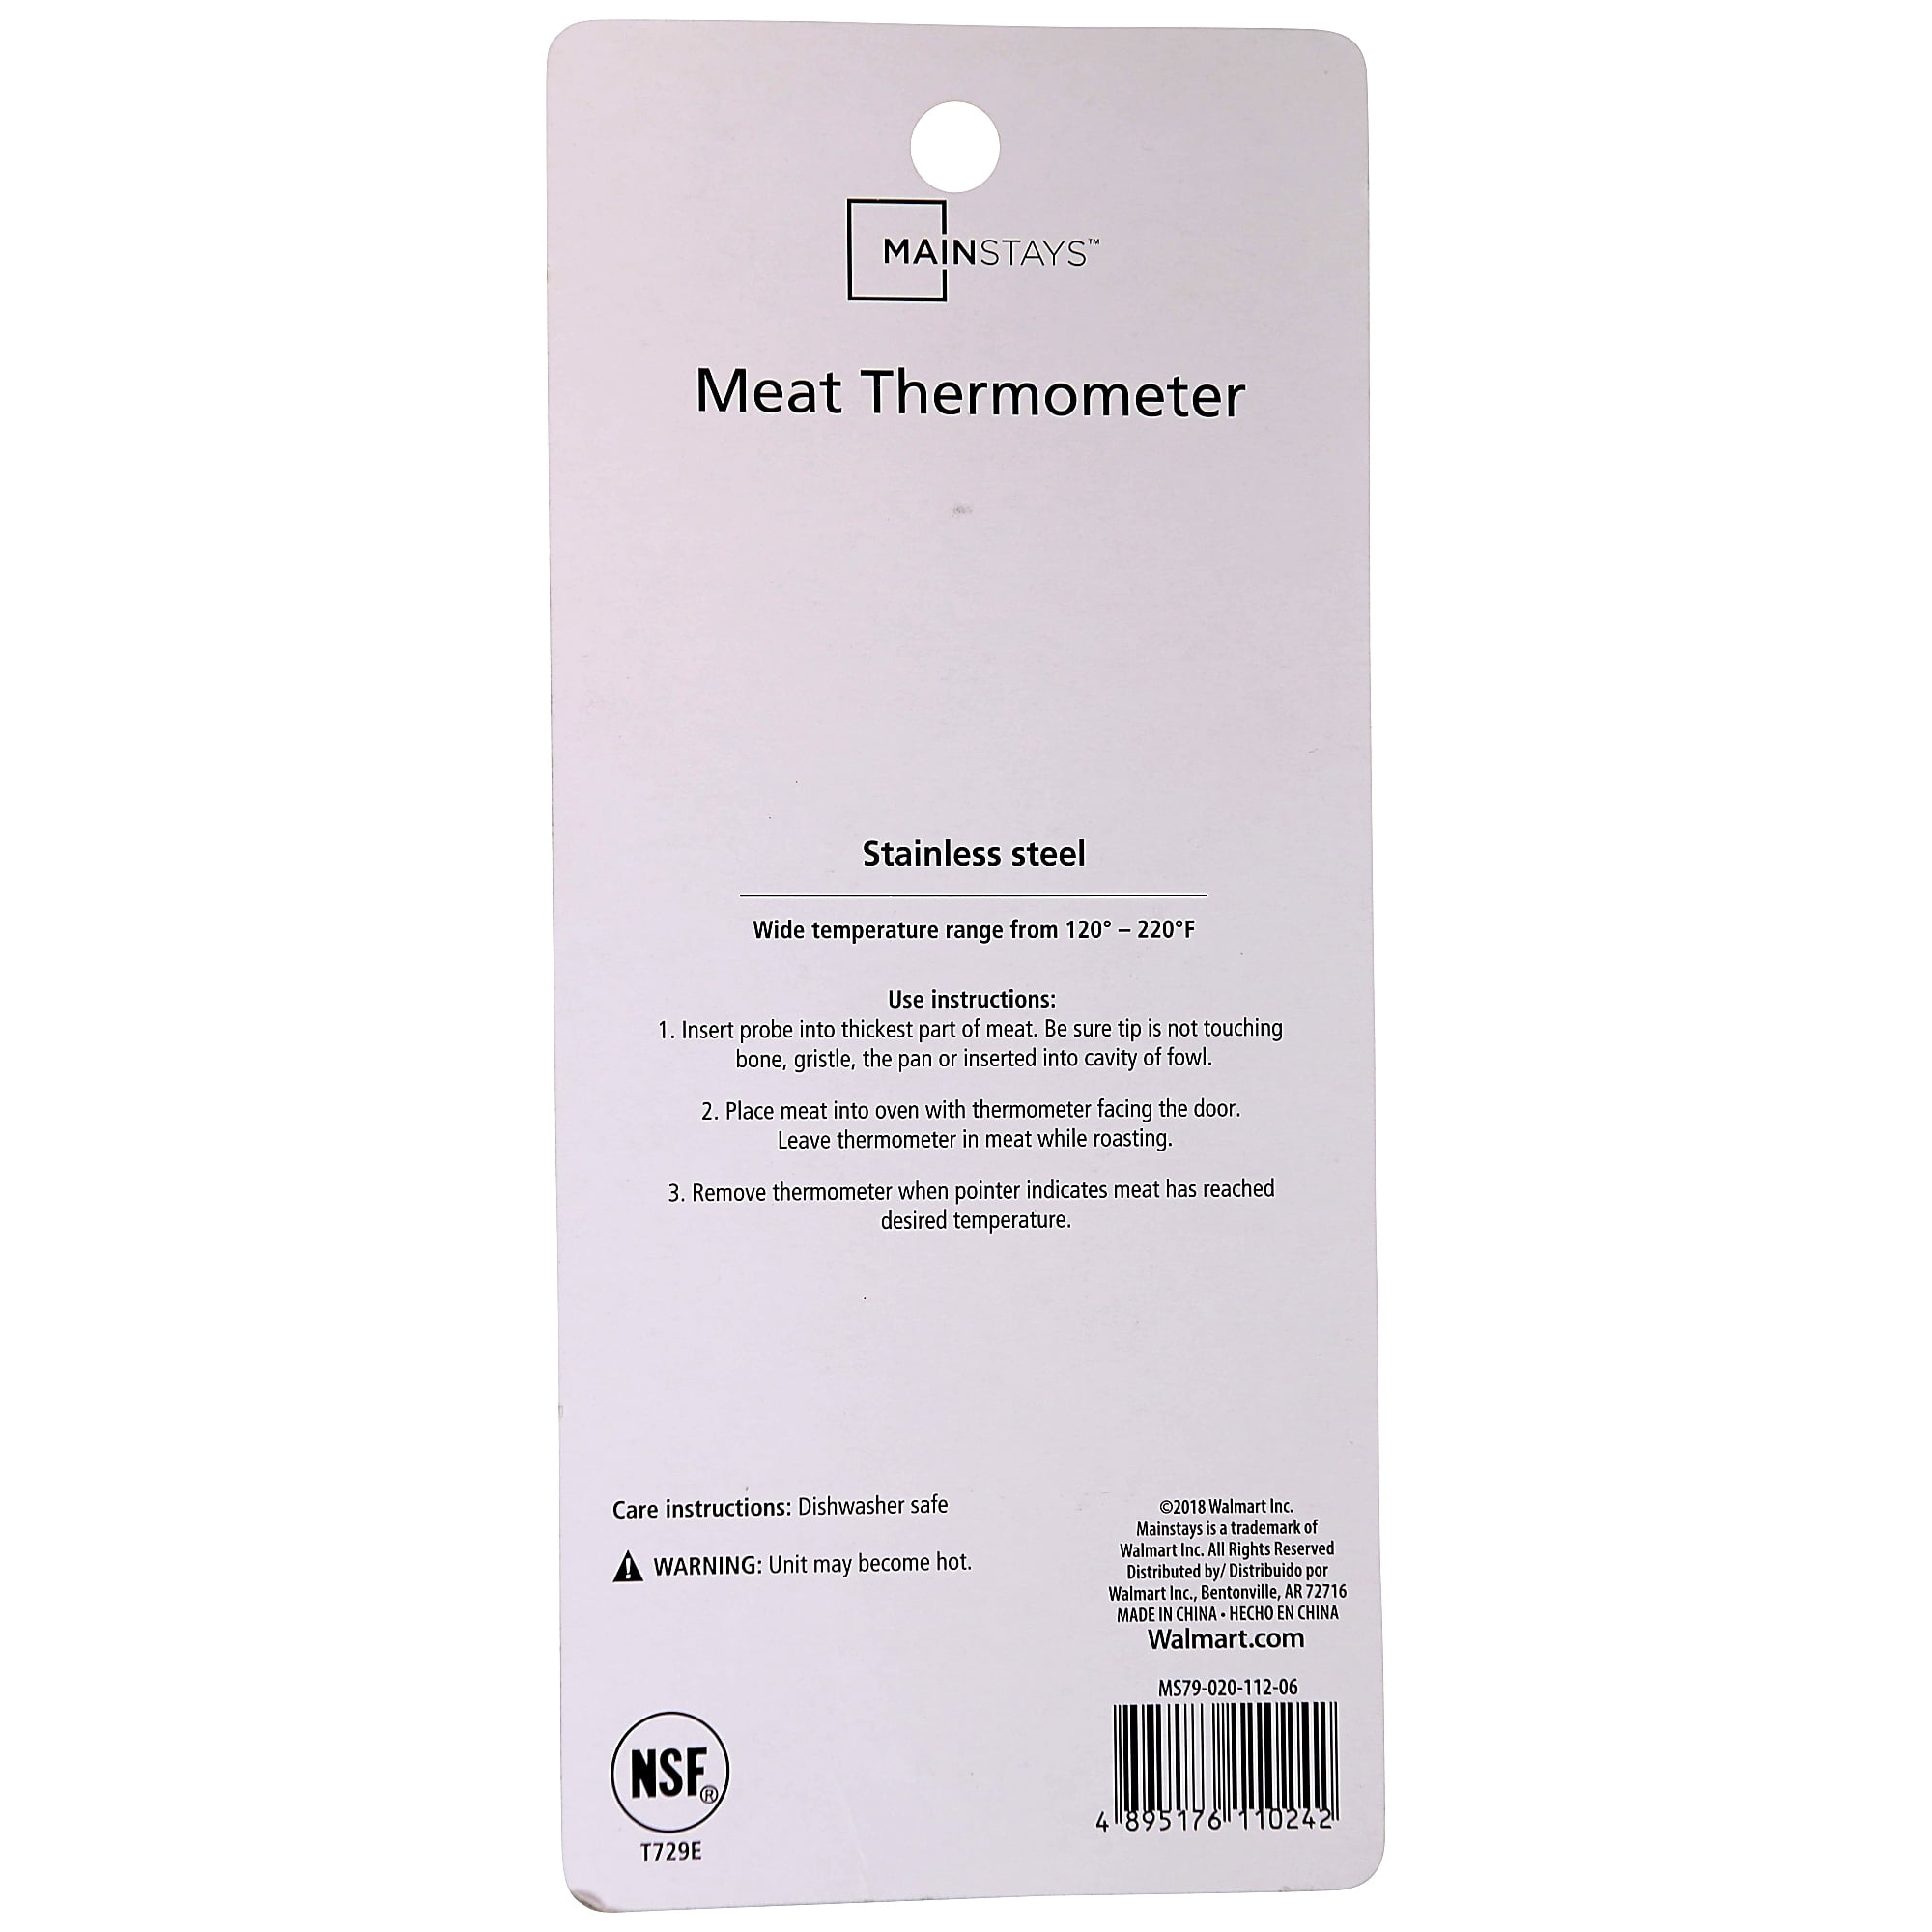  Mainstays NSF Certified Oven Safe Meat Thermometer